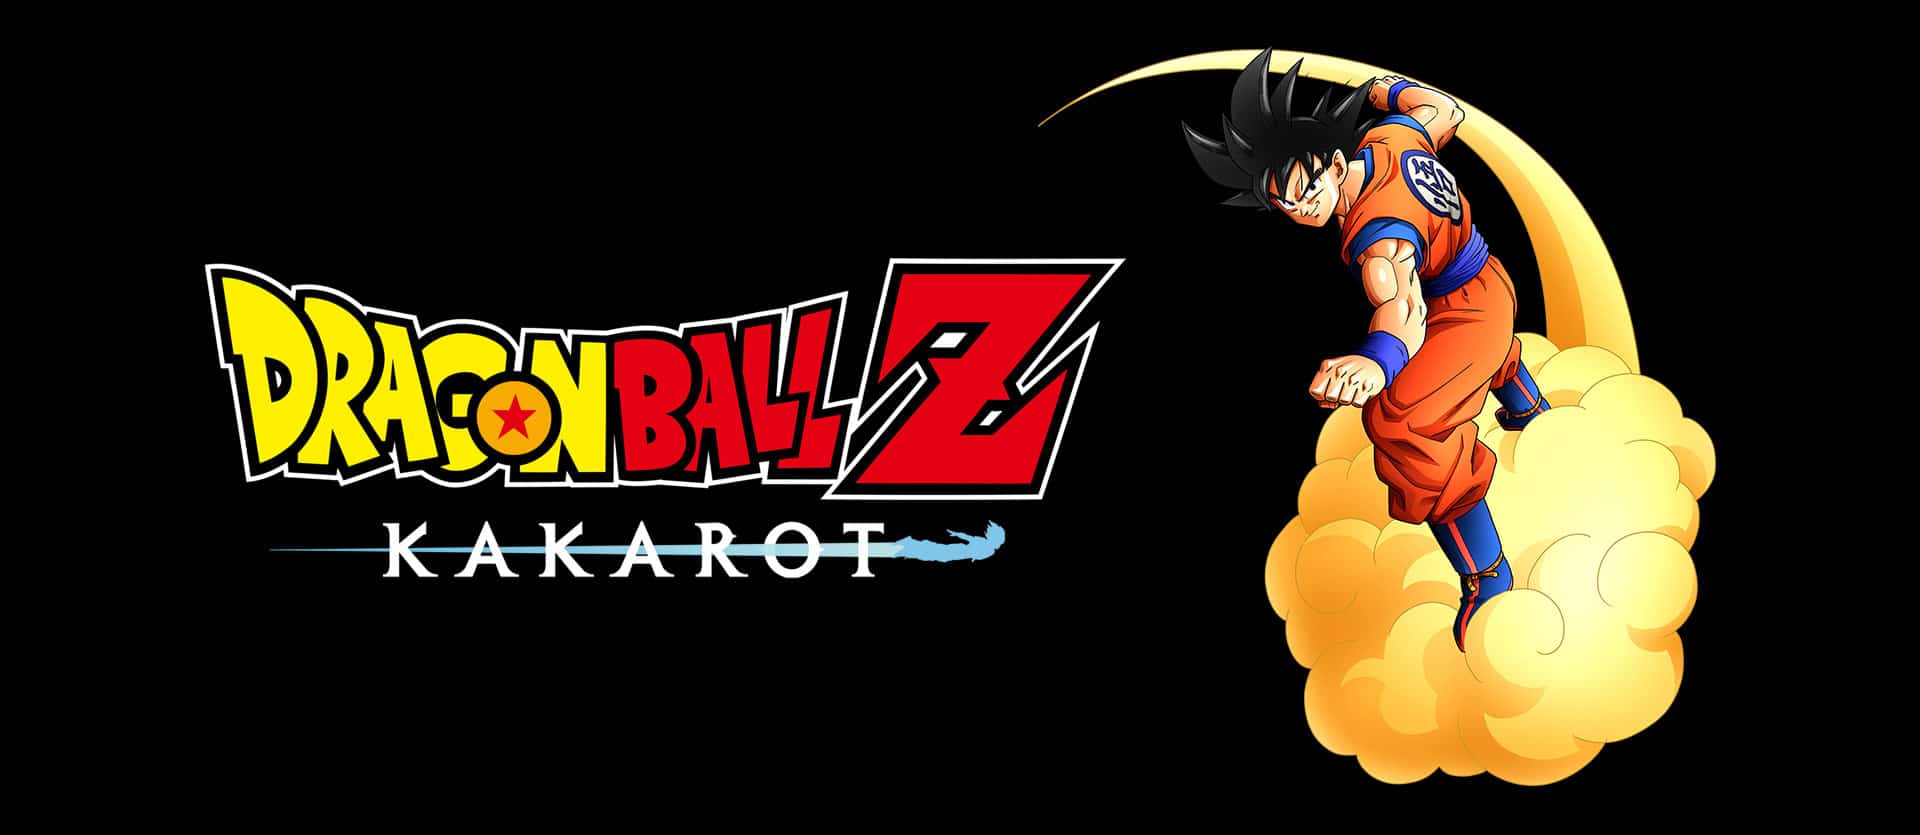 Dragon Ball Game Project Z Will be called Dragon Ball Z Kakarot, Reveals New Trailer.